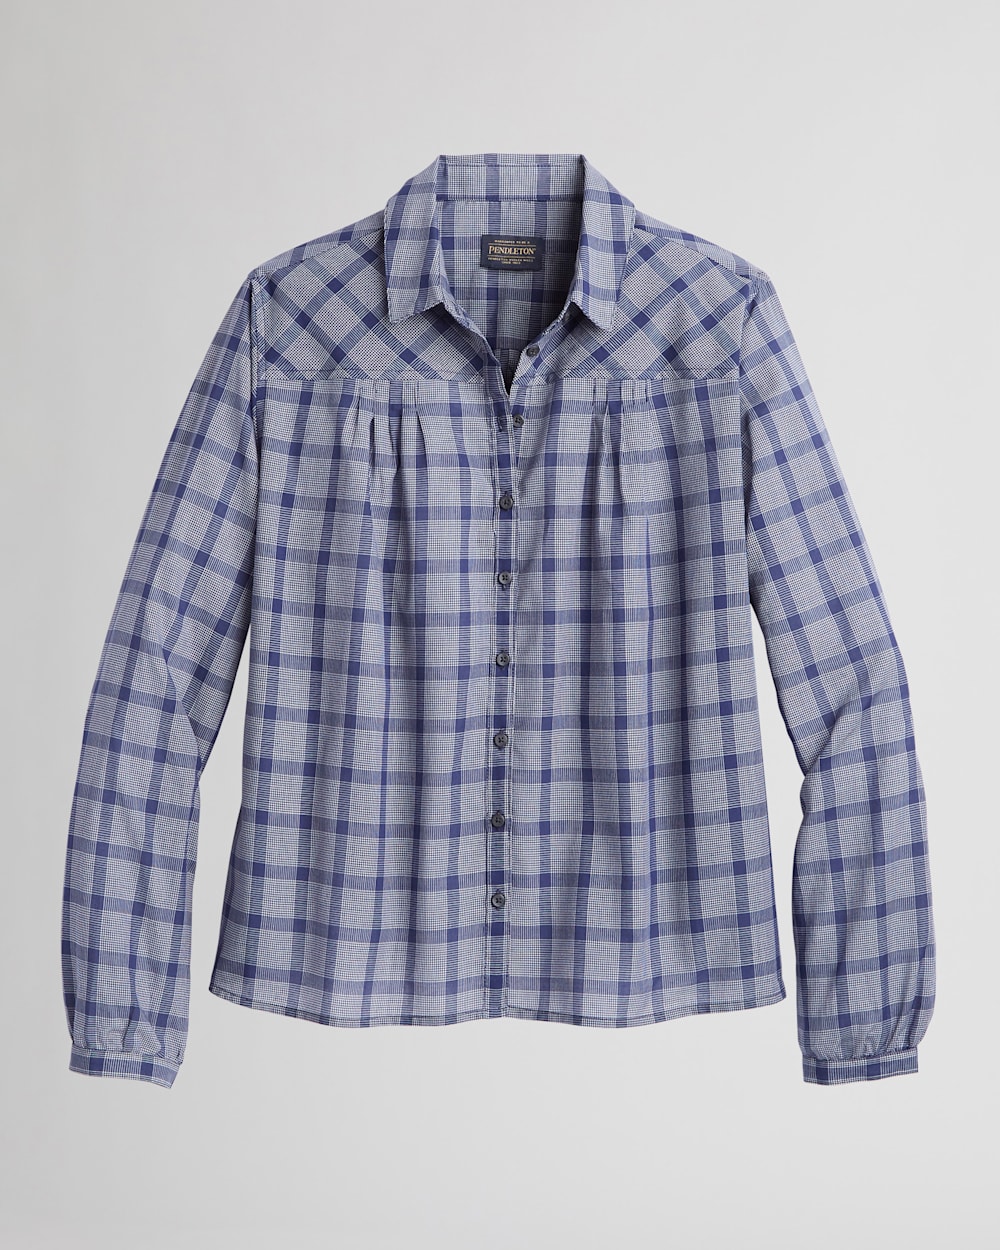 ALTERNATE VIEW OF WOMEN'S AIRY COTTON SHIRT IN NAVY/WHITE PLAID image number 6